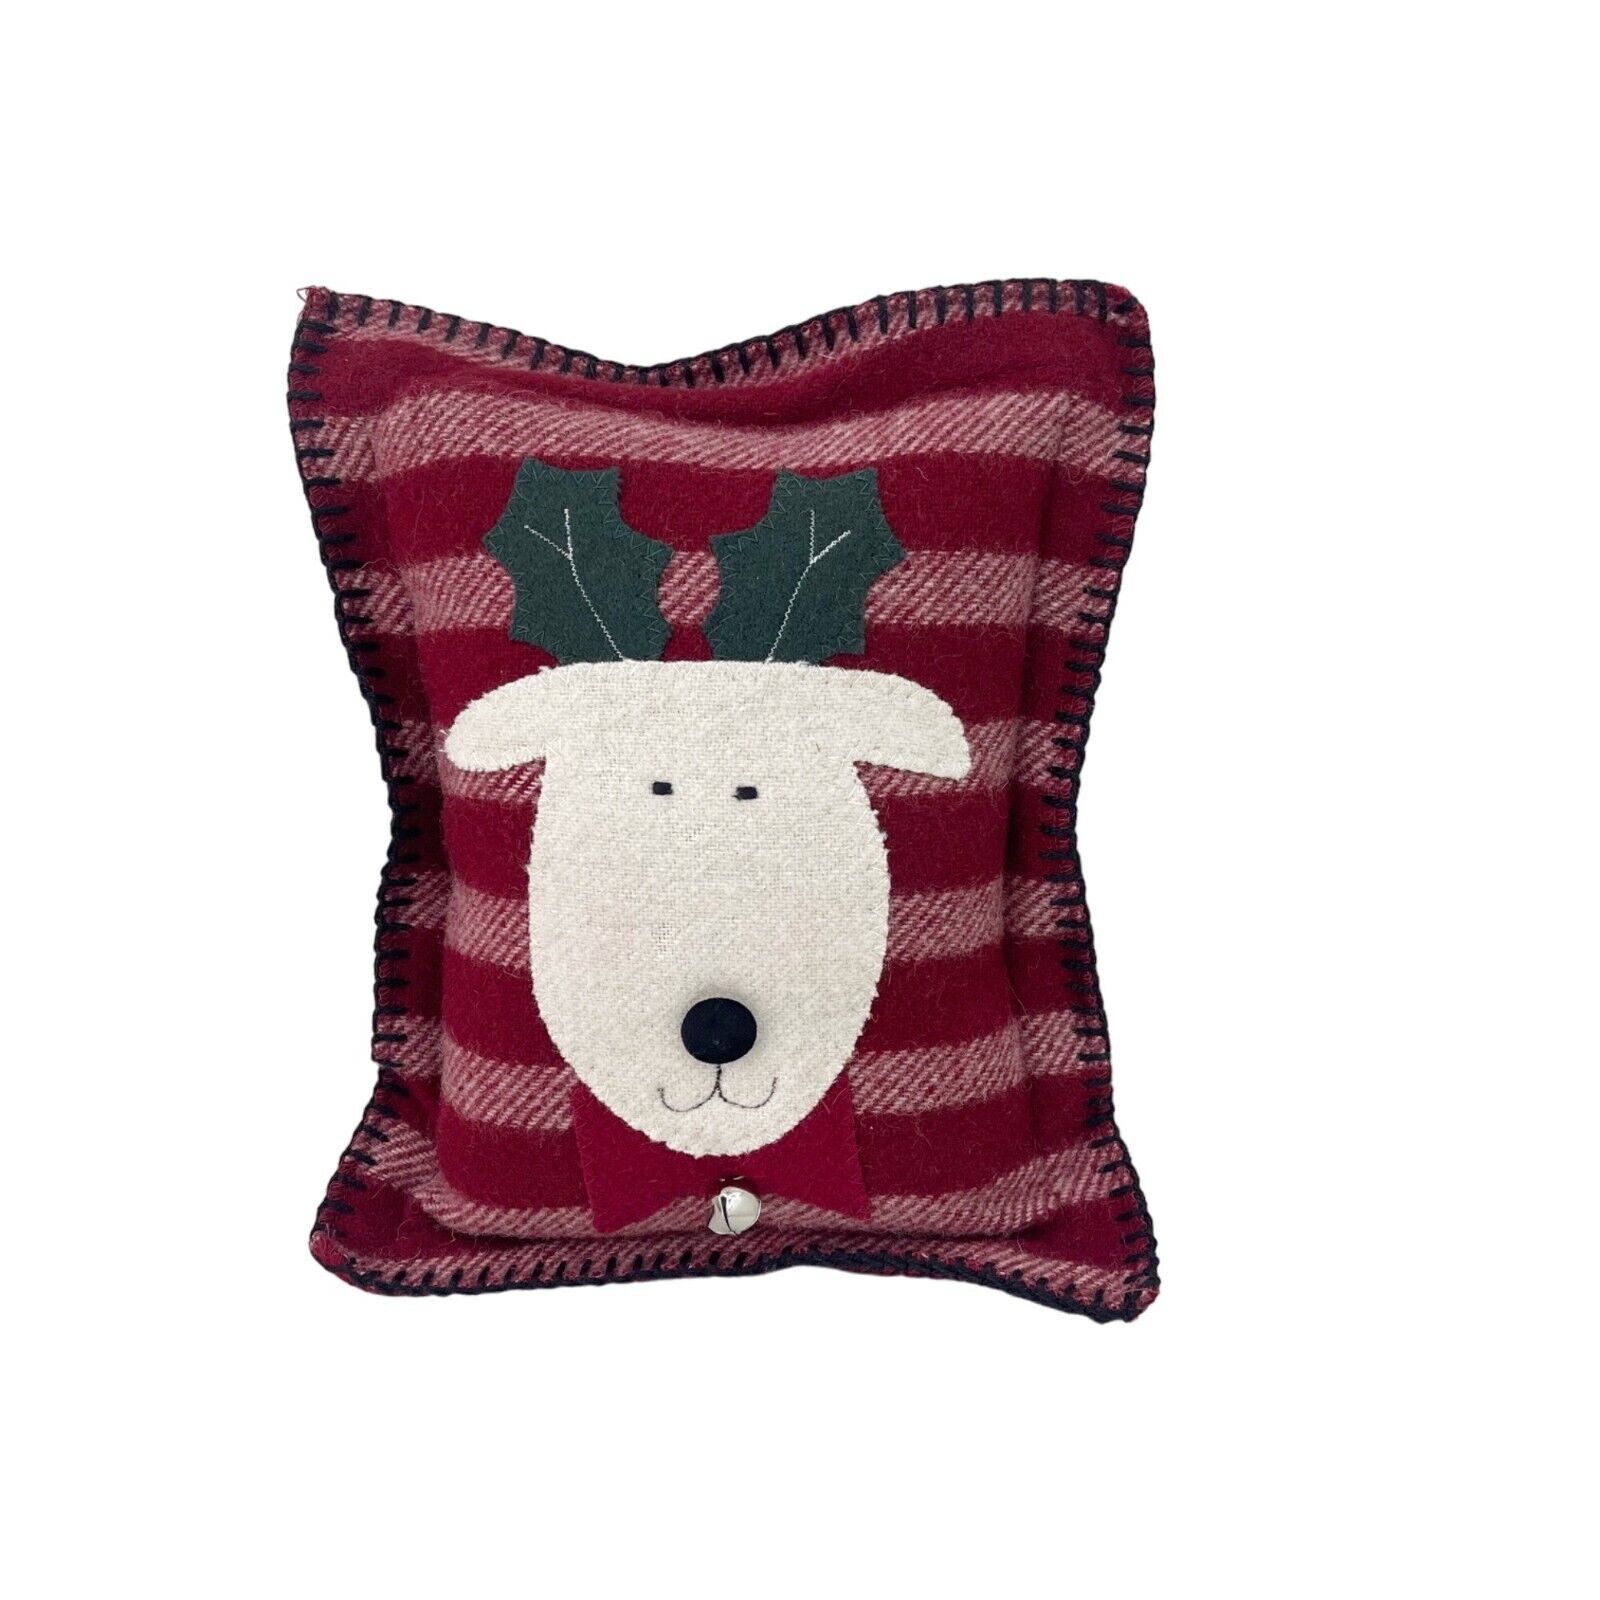 VTG 1999 Woof & Poof Dog Reindeer Applique Throw Pillow Christmas Holiday Decor